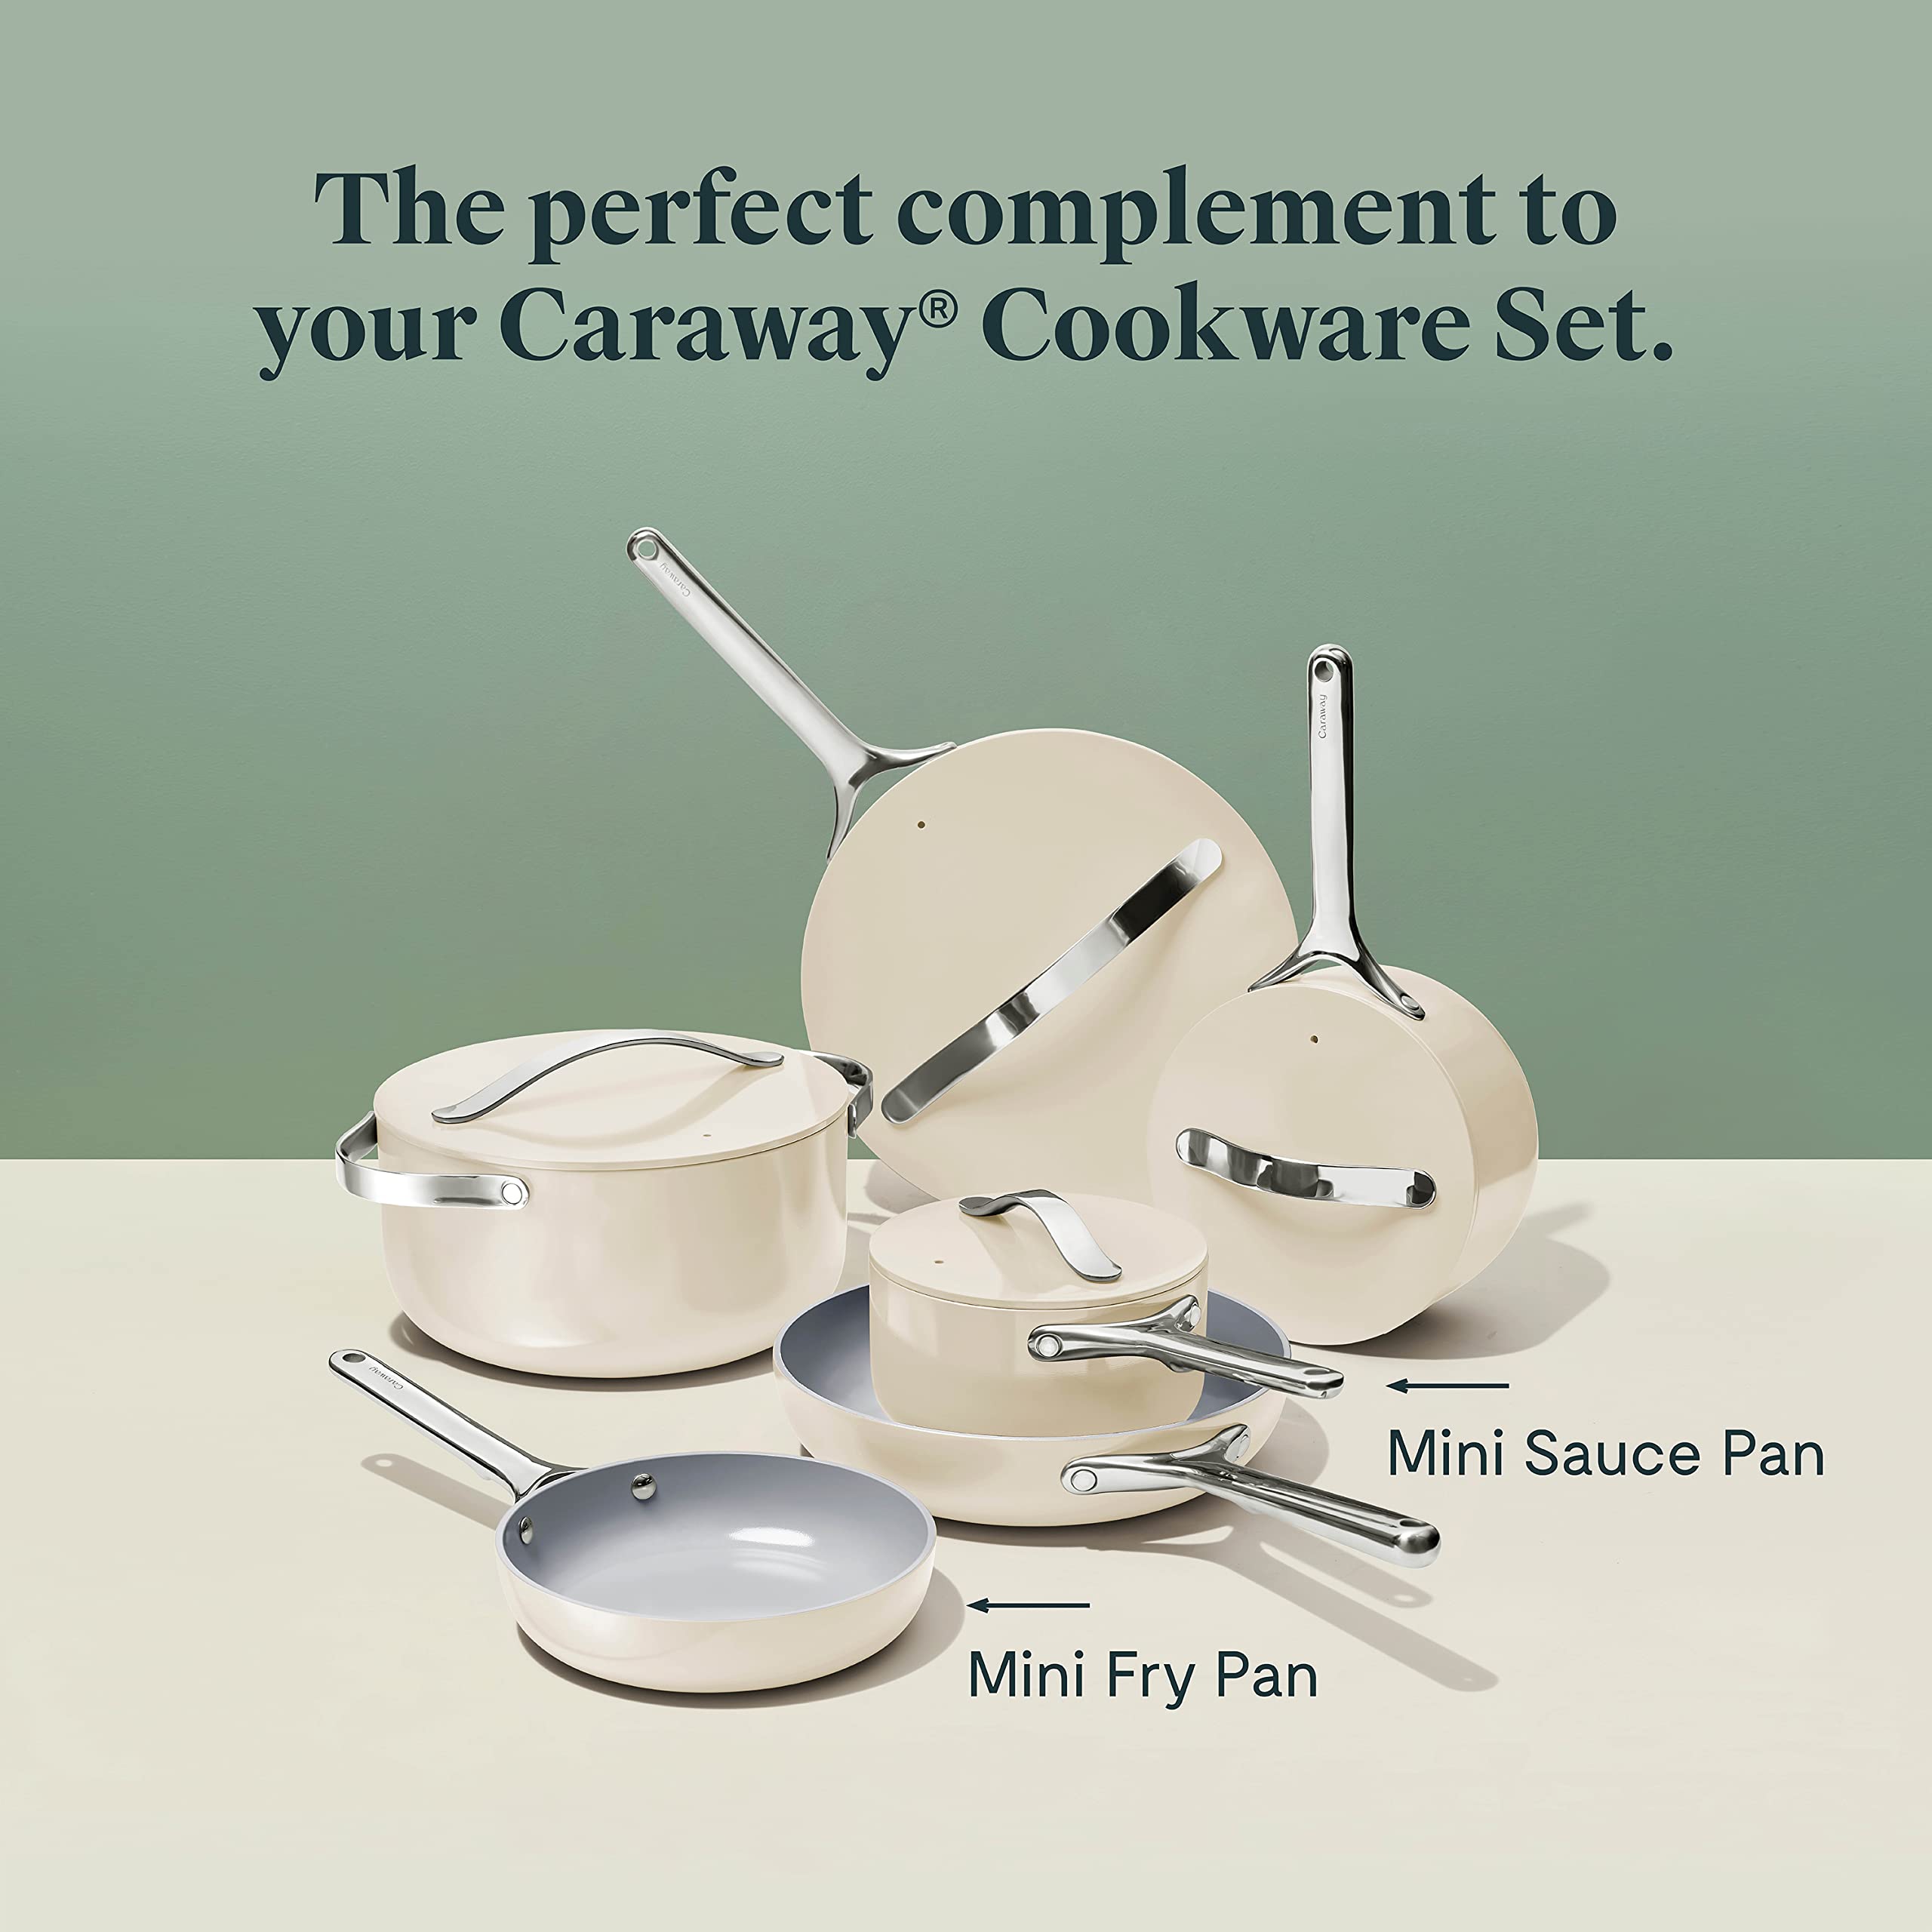 Caraway Nonstick Ceramic Sauce Pan with Lid (1.75 qt) - Non Toxic, PTFE & PFOA Free - Oven Safe & Compatible with All Stovetops (Gas, Electric & Induction) - Cream